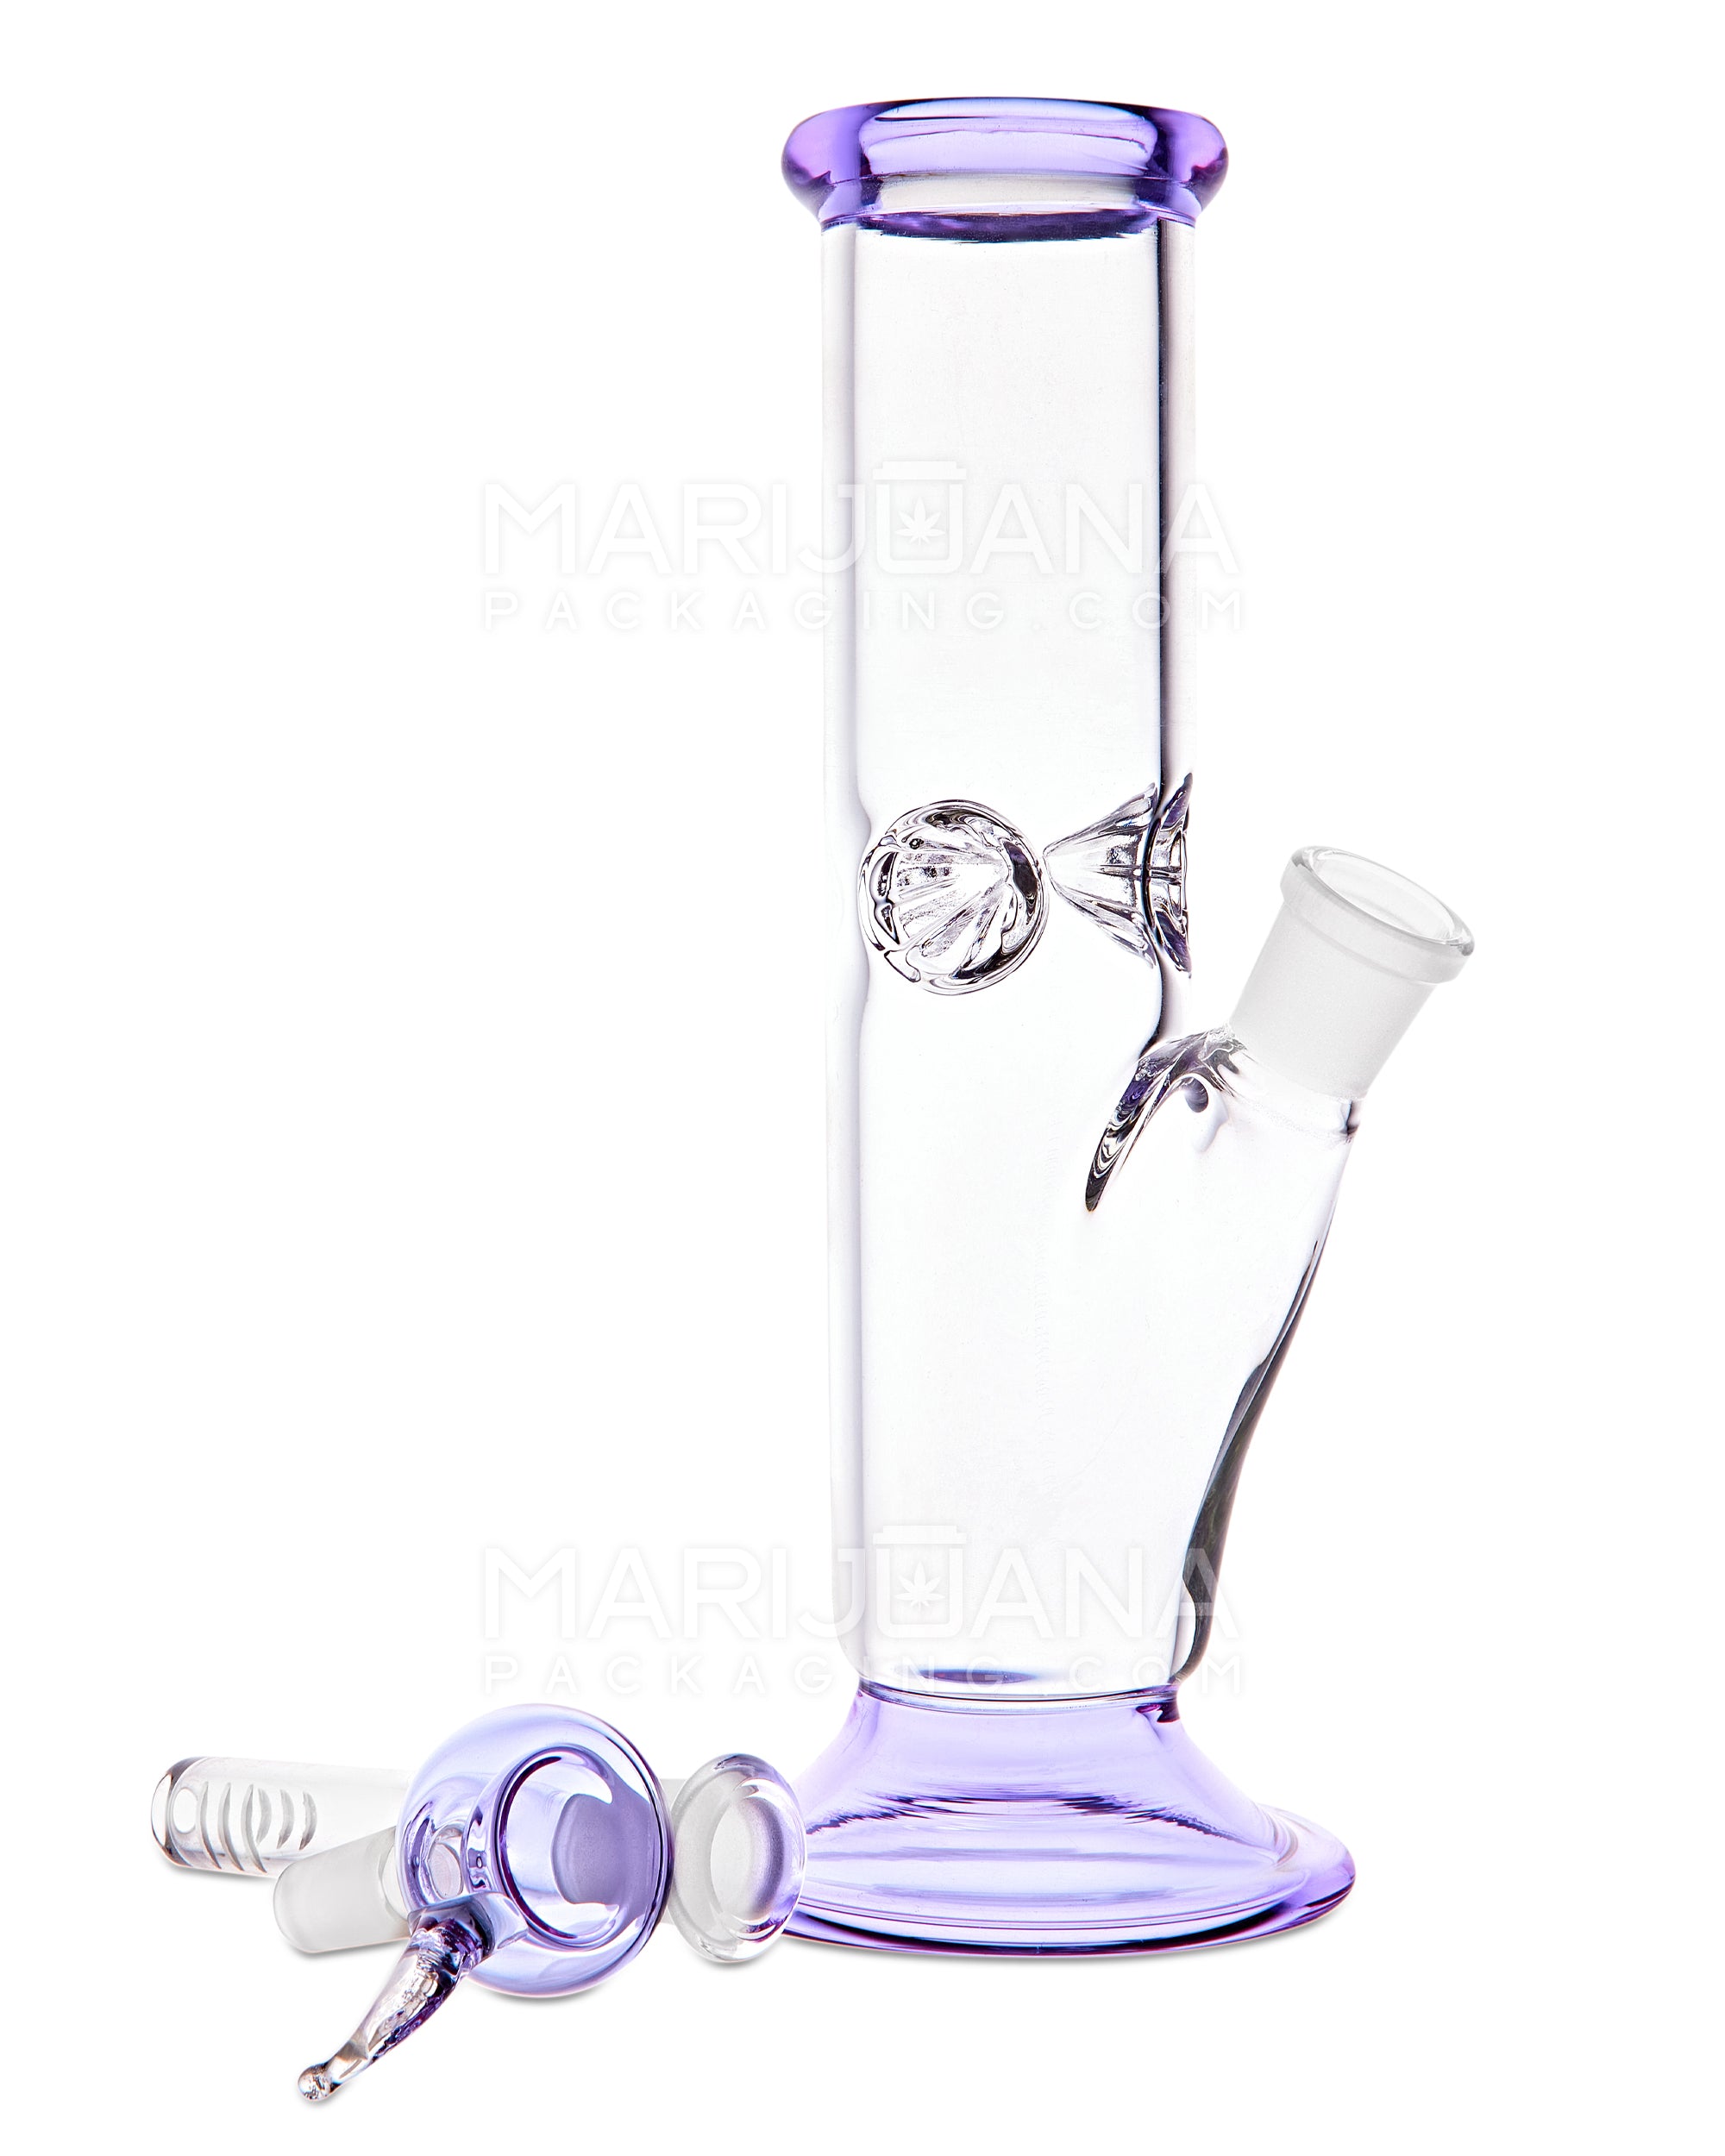 USA Glass | Straight Glass Water Pipe w/ Ice Catcher | 9in Tall - 14mm Bowl - Light Blue - 2